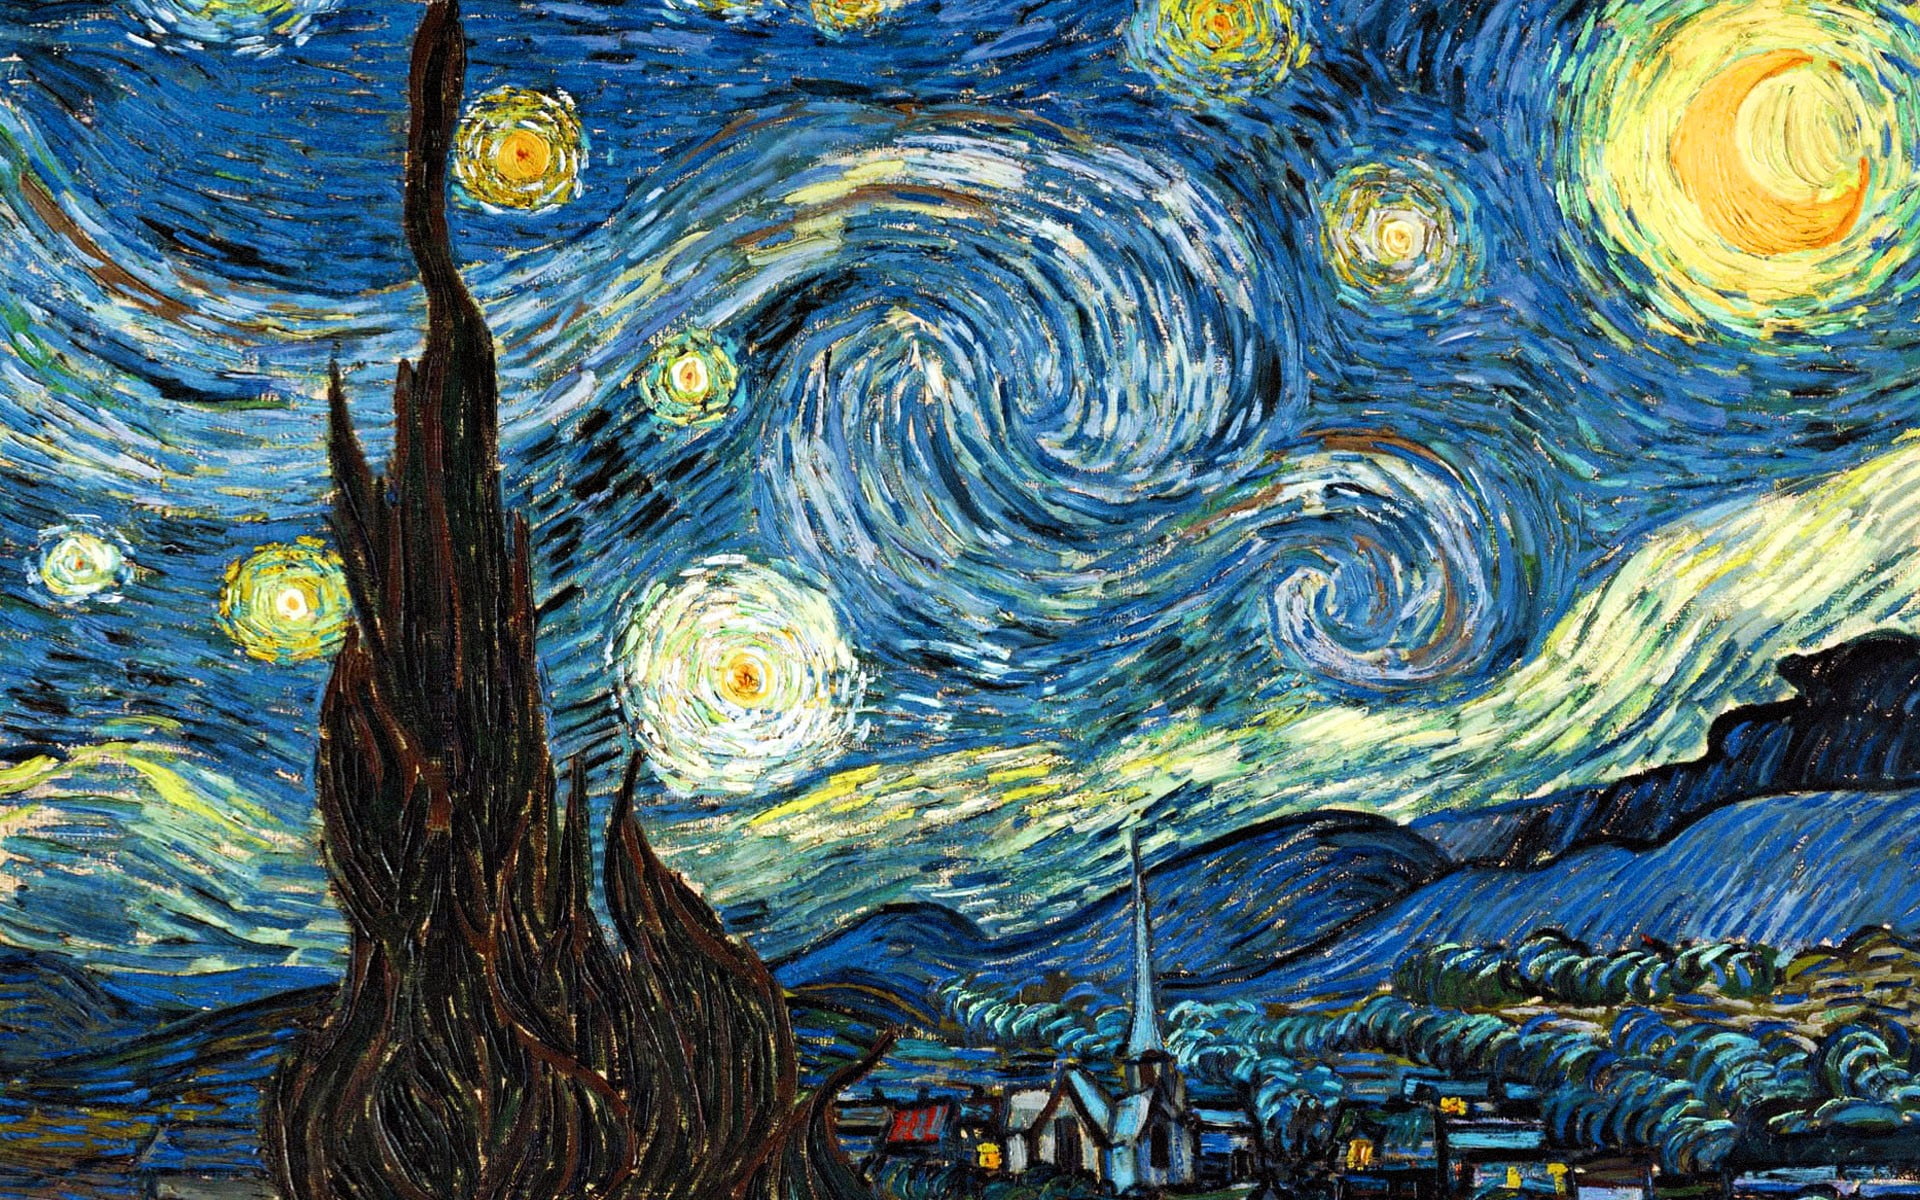 Starry Starry night by Vincent Van Gogh, painting, The Starry Night